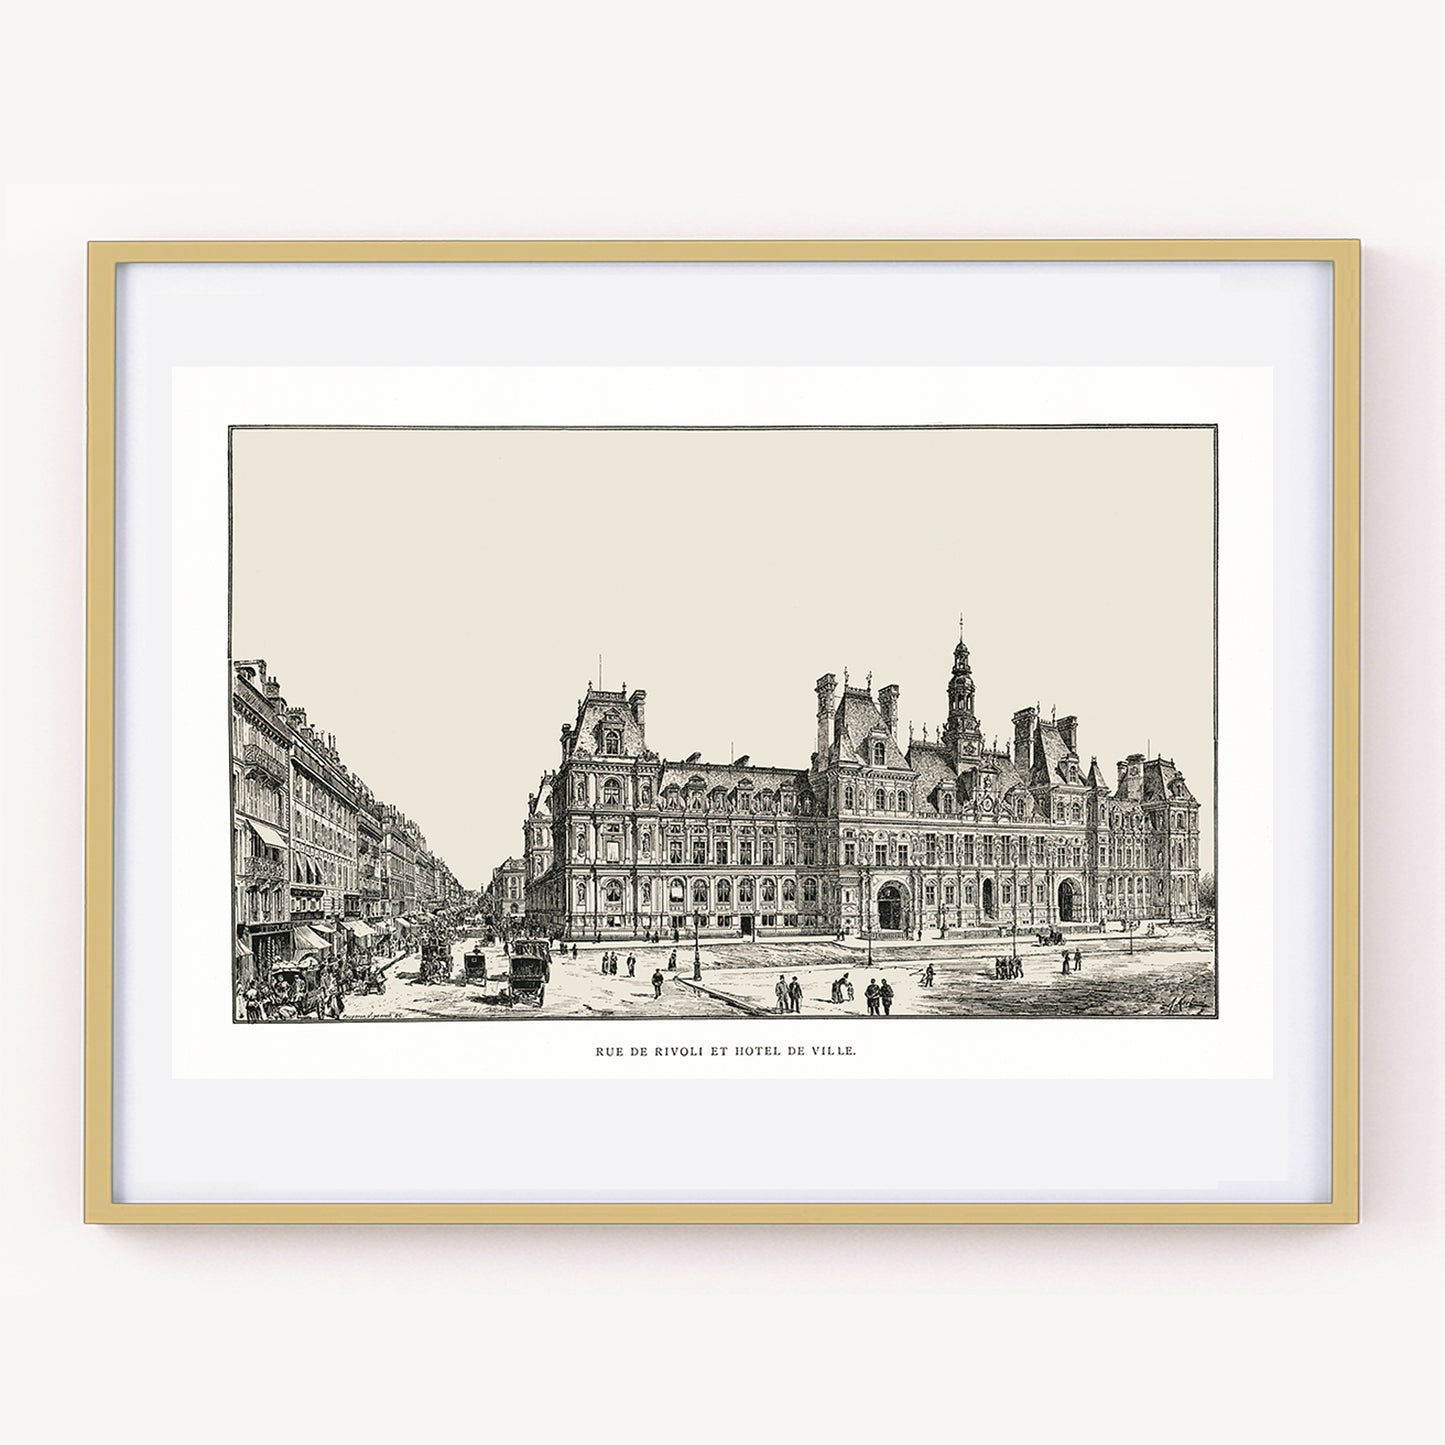 Paris City Hall poster reprint of a 1889 engraving by Auguste Vitu